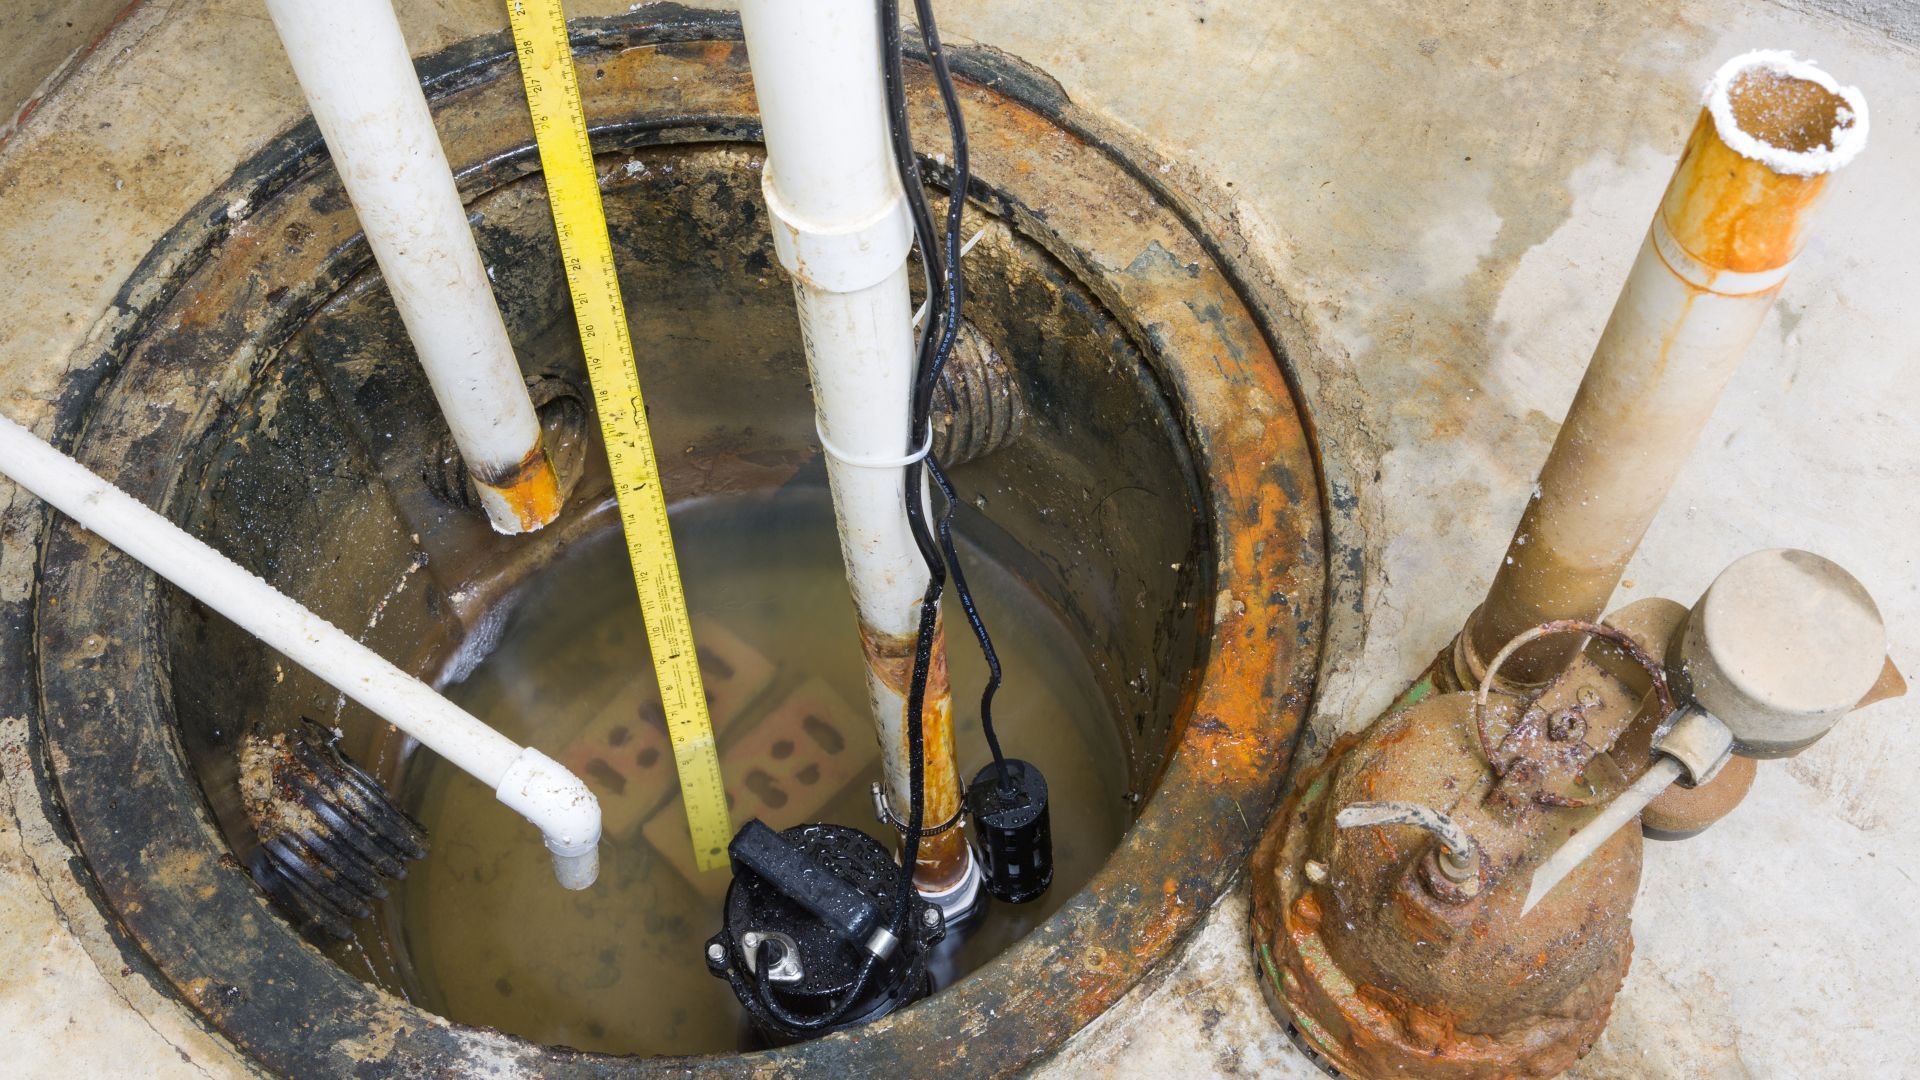 Sump Pump for Waterproofing and Preventing Basement Floods, Especially with Plumbers' Expertise.